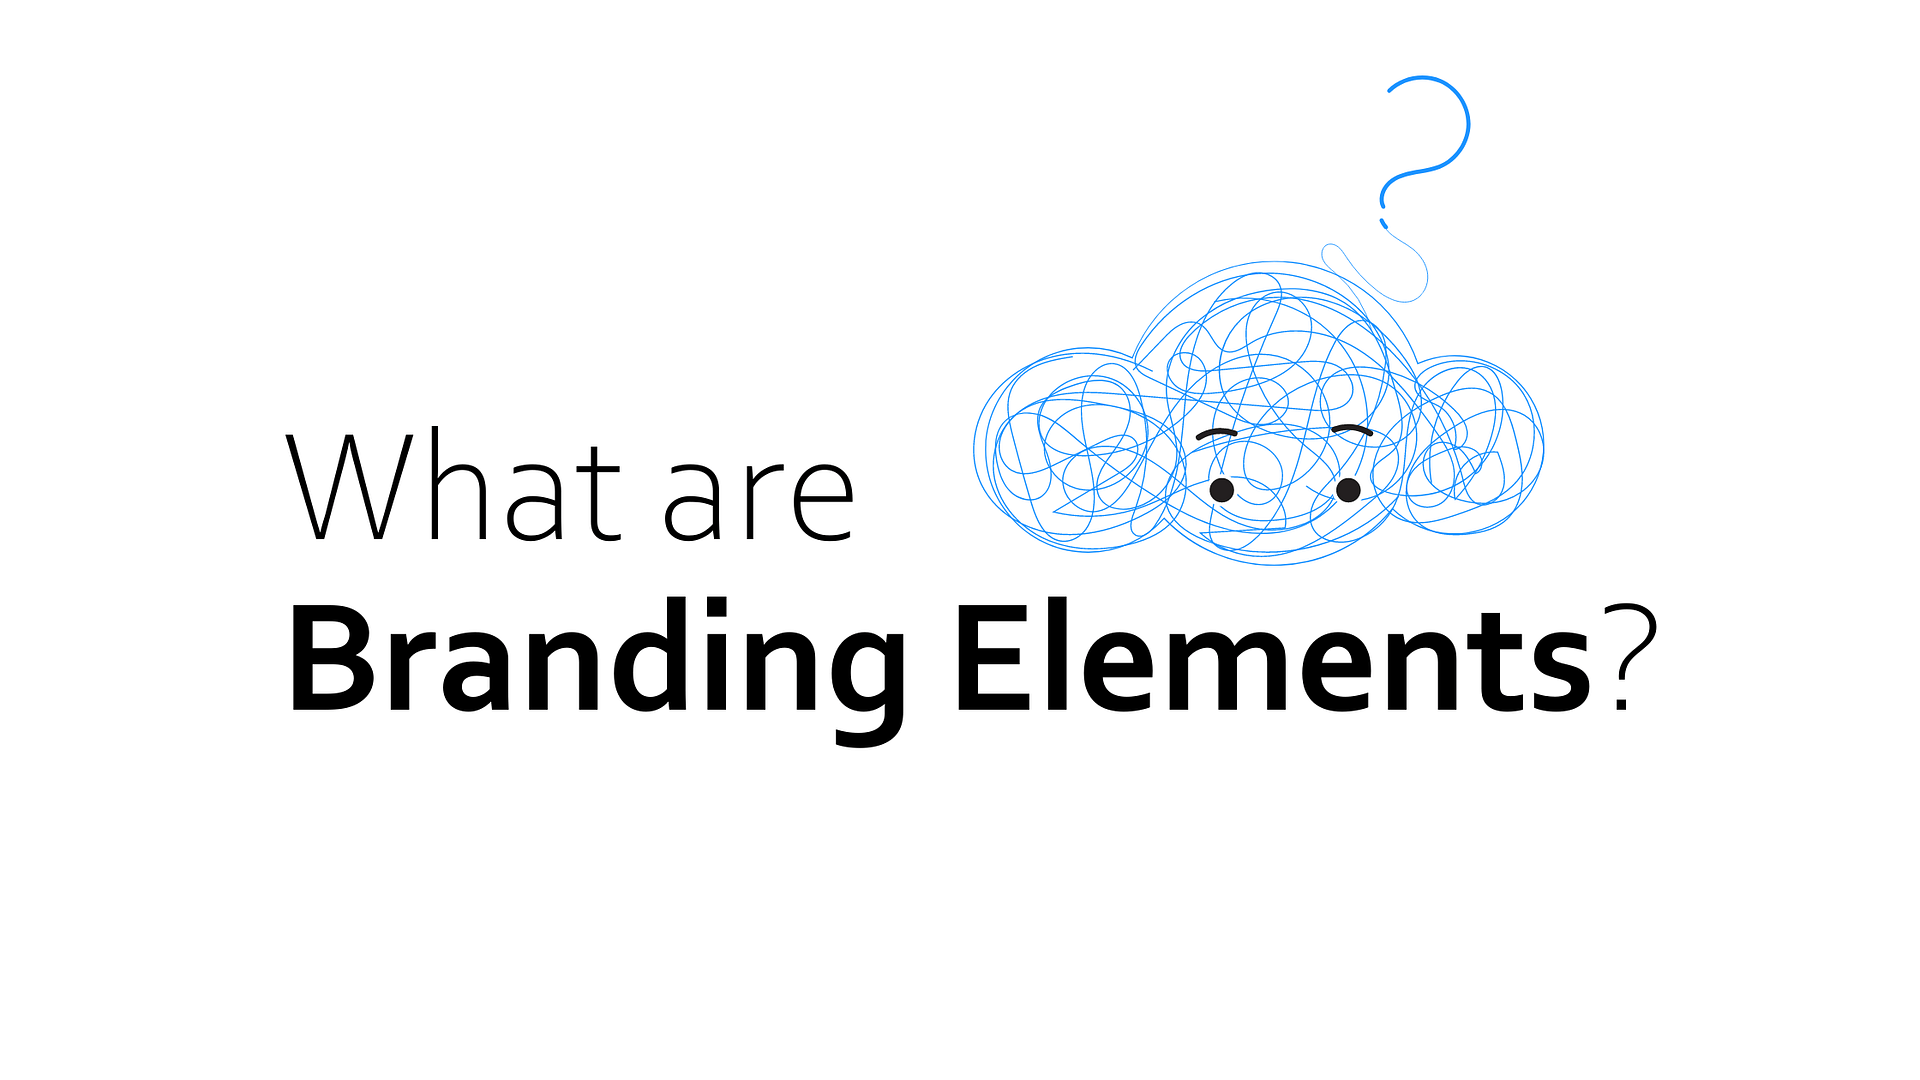 what are branding elements?